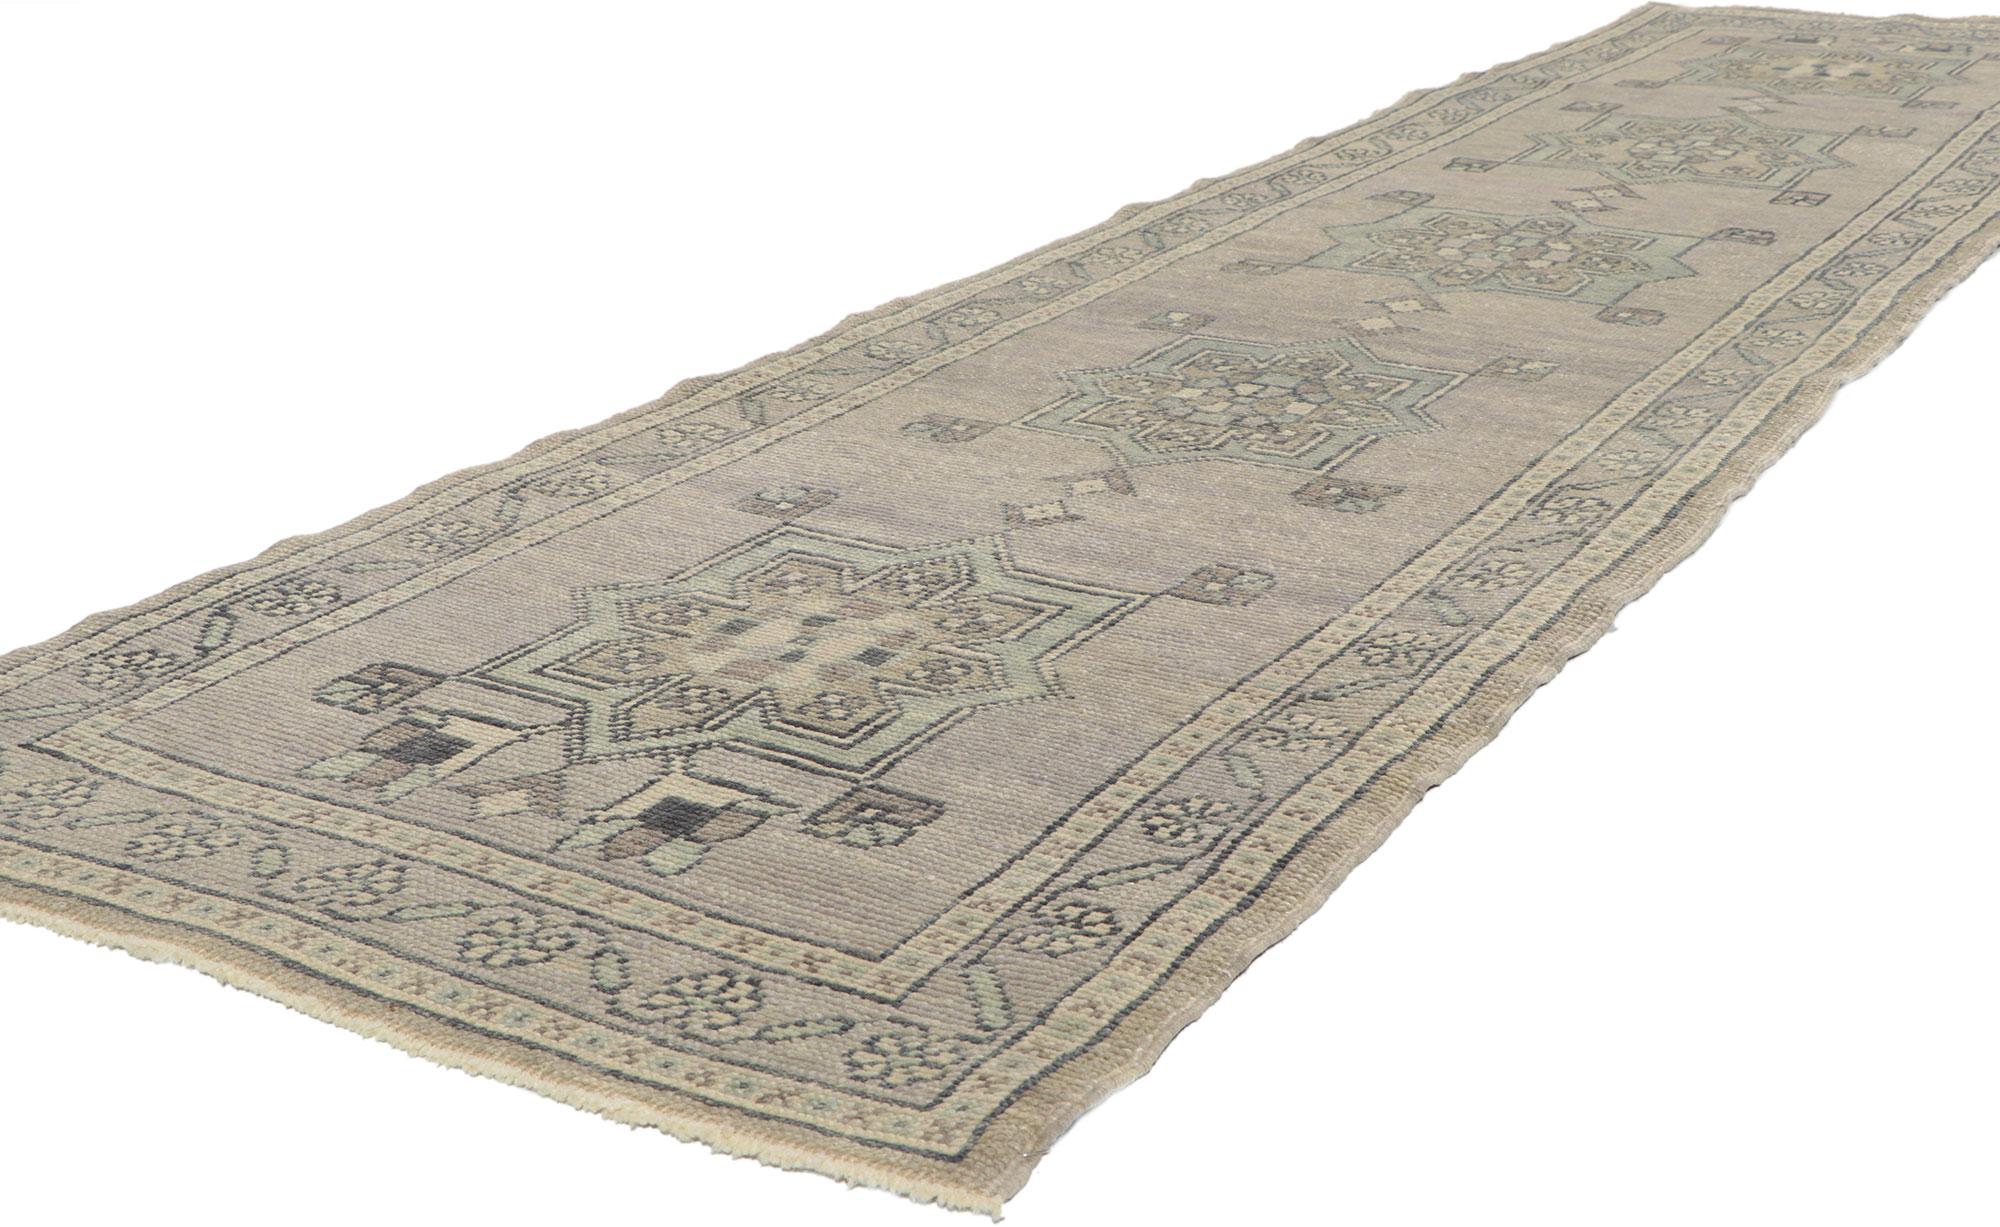 53794 new contemporary Turkish Oushak Runner with Modern style, 02'08 x 11'02. This hand-knotted wool contemporary Turkish Oushak runner features a botanical pattern spread across an abrashed bluish-grayish field. An array of botanical motifs